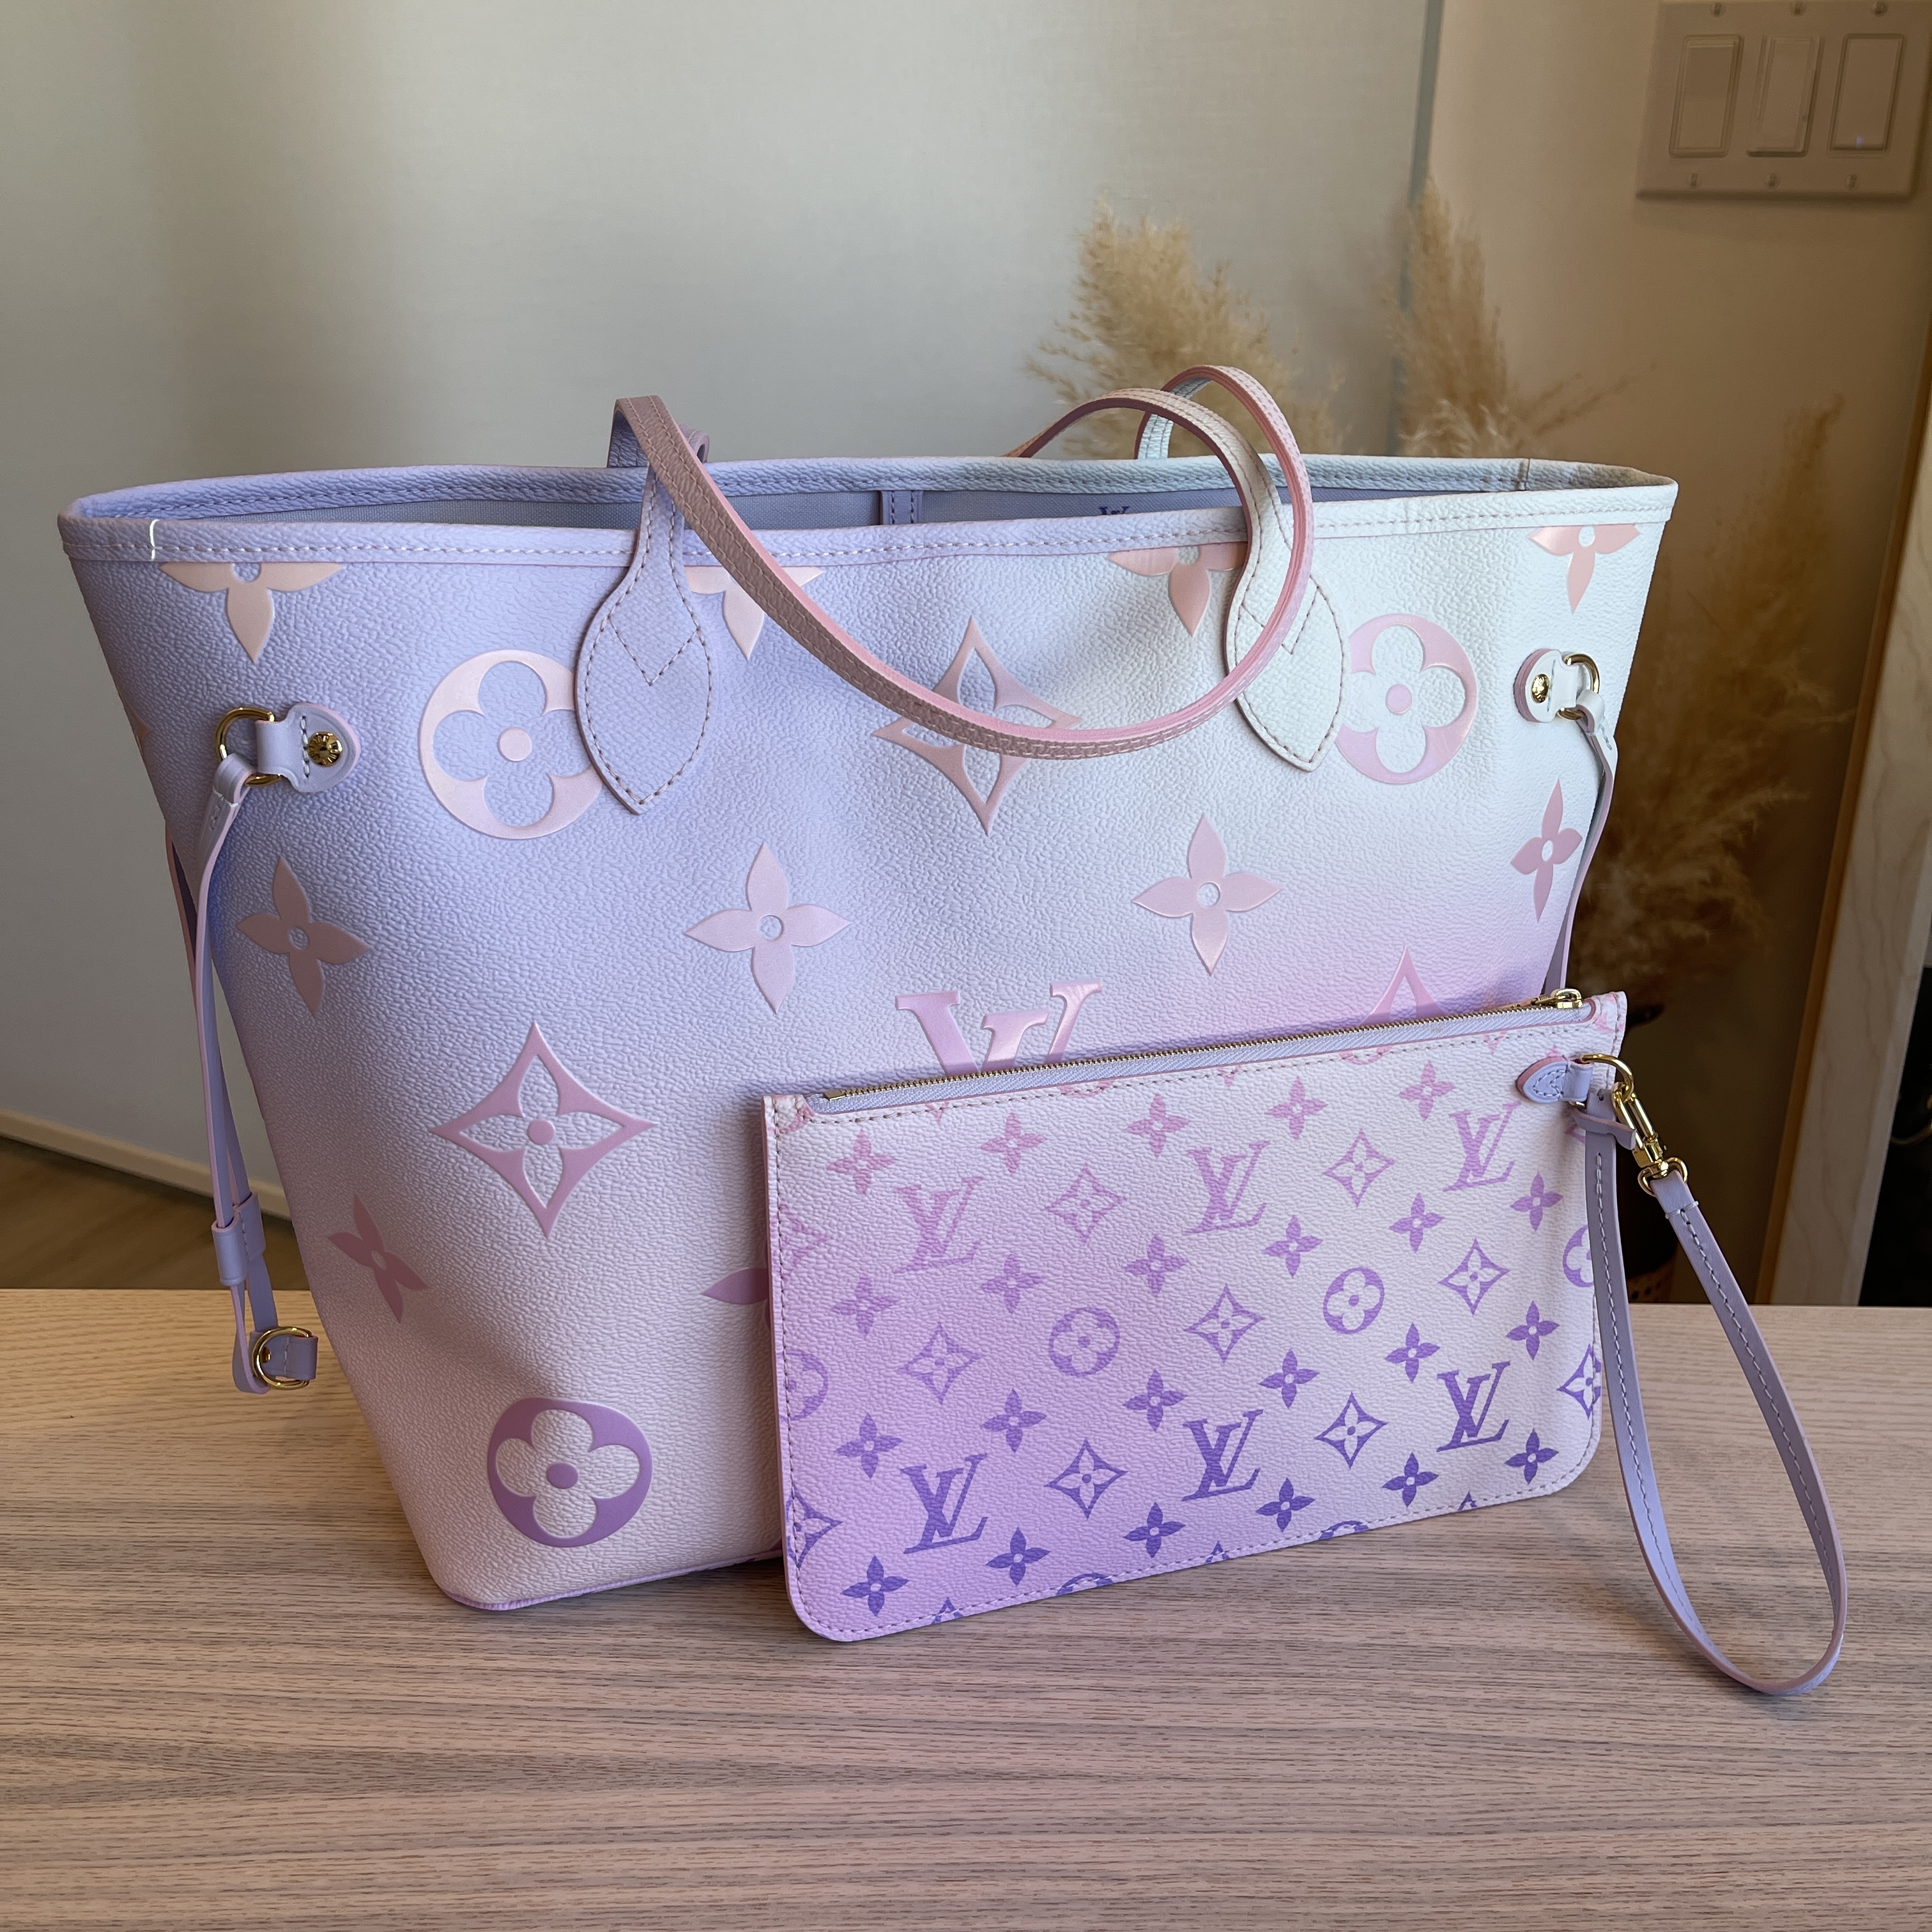 Louis Vuitton Spring In The City Sunrise Pastel Neverfull MM Set